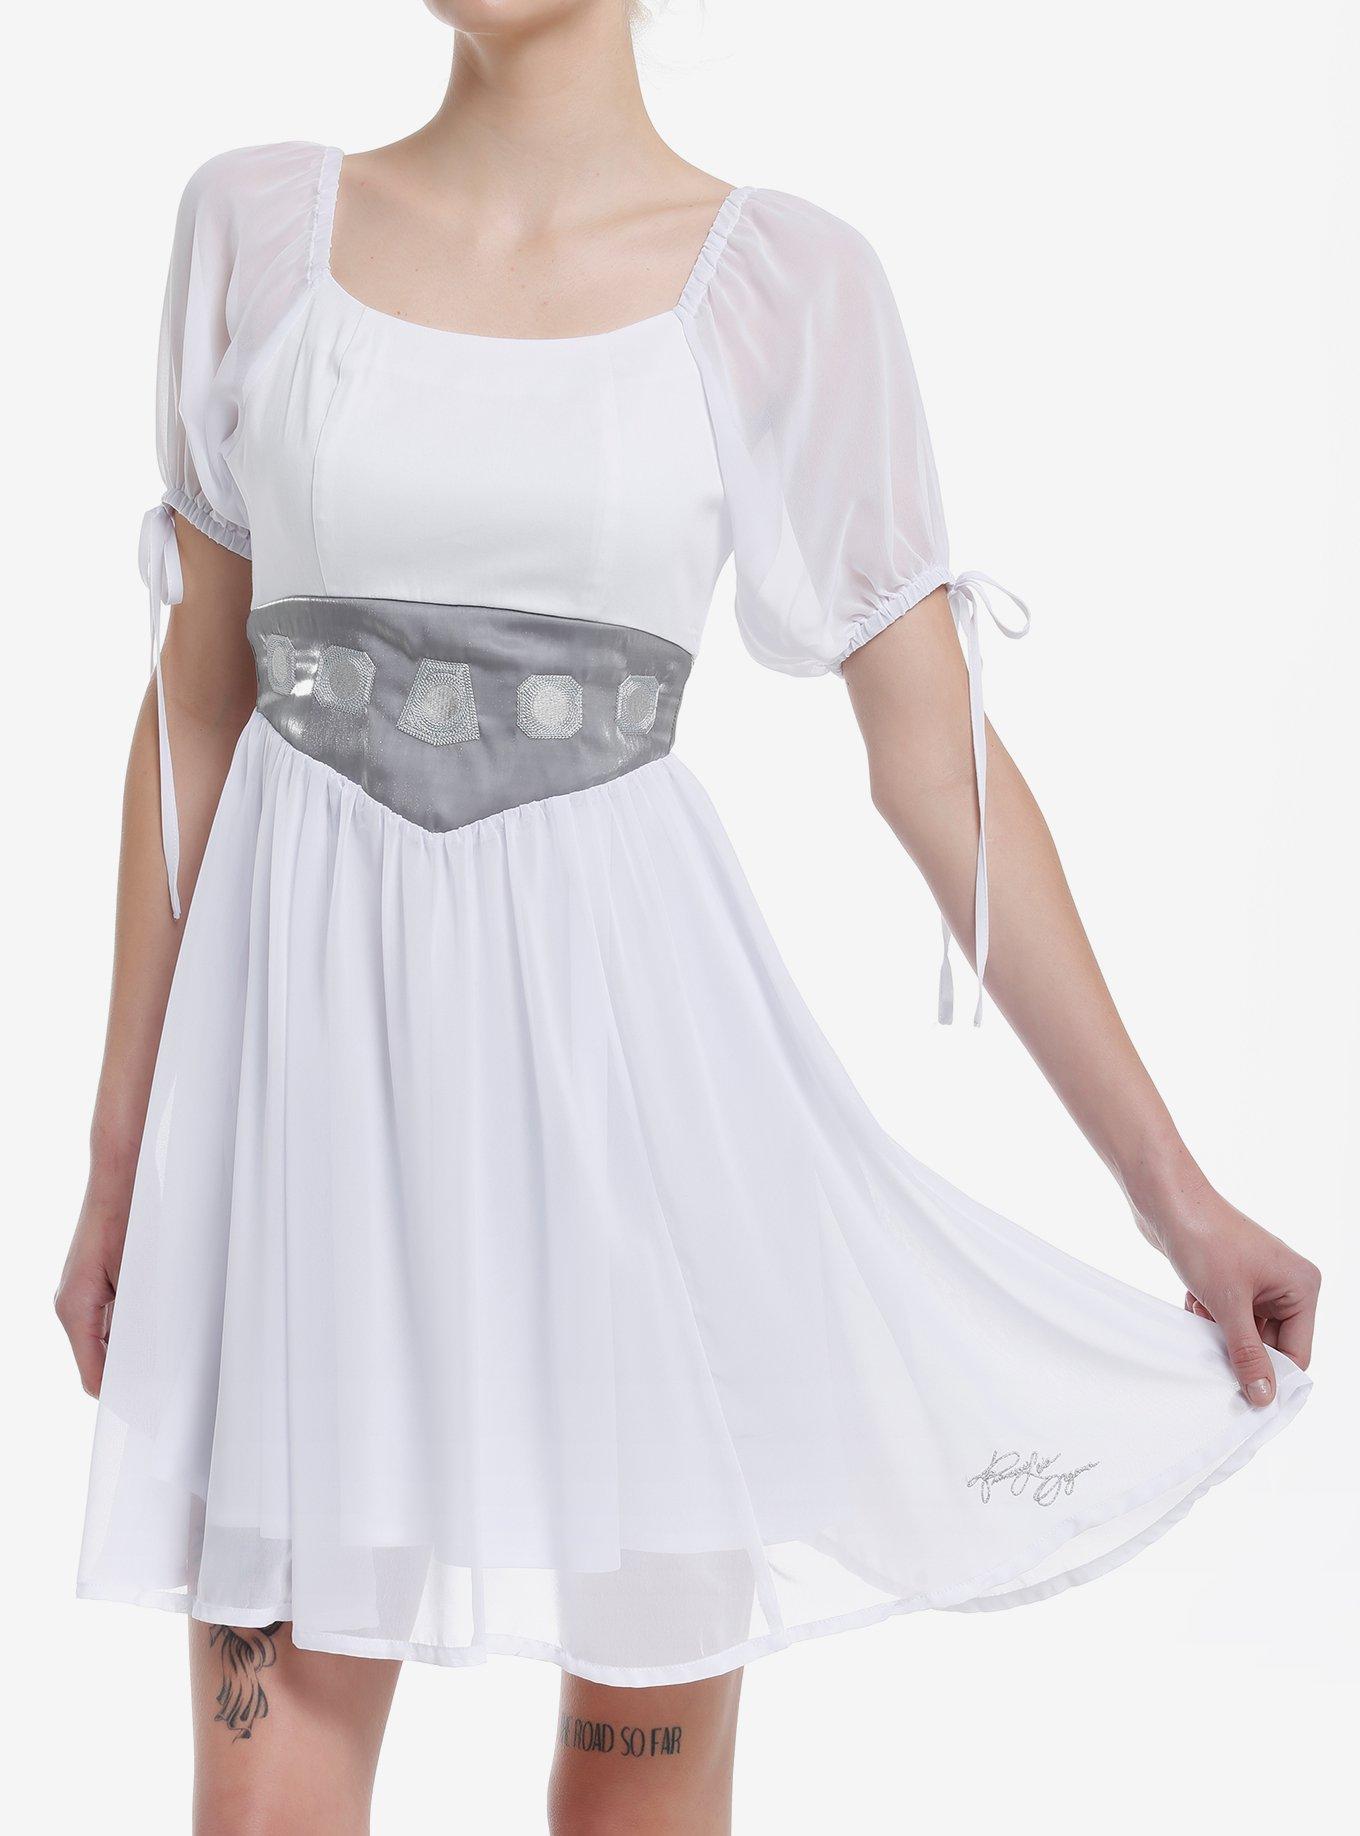 Her Universe Star Wars Princess Leia Puff Sleeve Dress Her Universe Exclusive, BRIGHT WHITE, hi-res